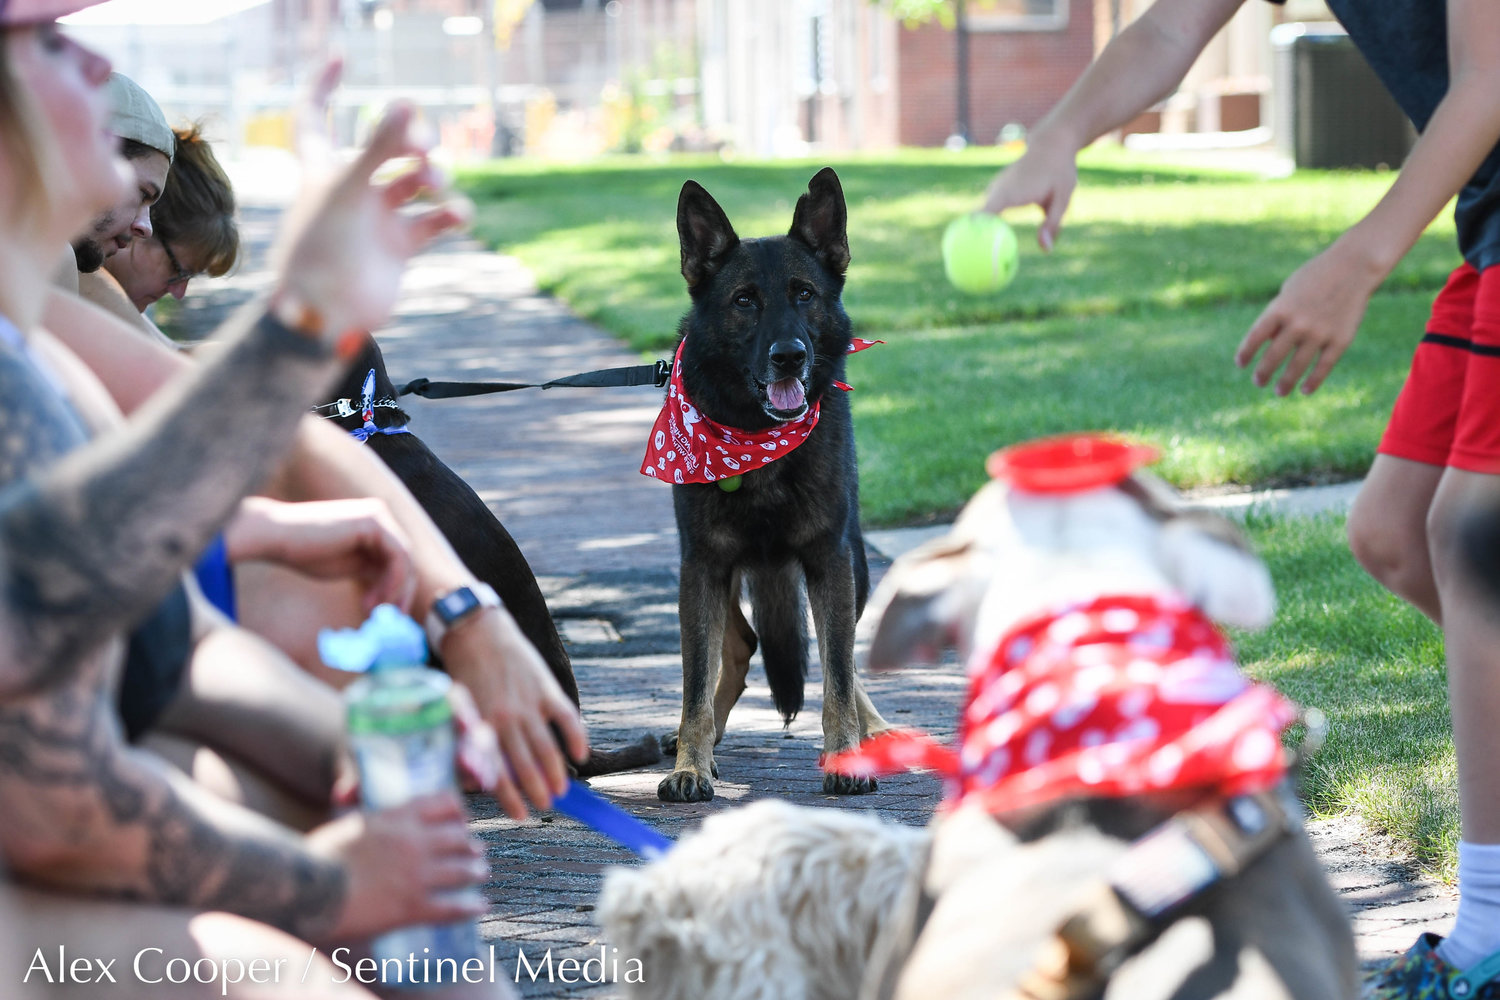 Phoenix, a German Shepherd, stares at a tennis ball during a dog show hosted by the Herkimer County Humane Society on Saturday at Central Plaza in Ilion. The show was part of a long list of events hosted during Ilion Days 2022 from July 16-24.